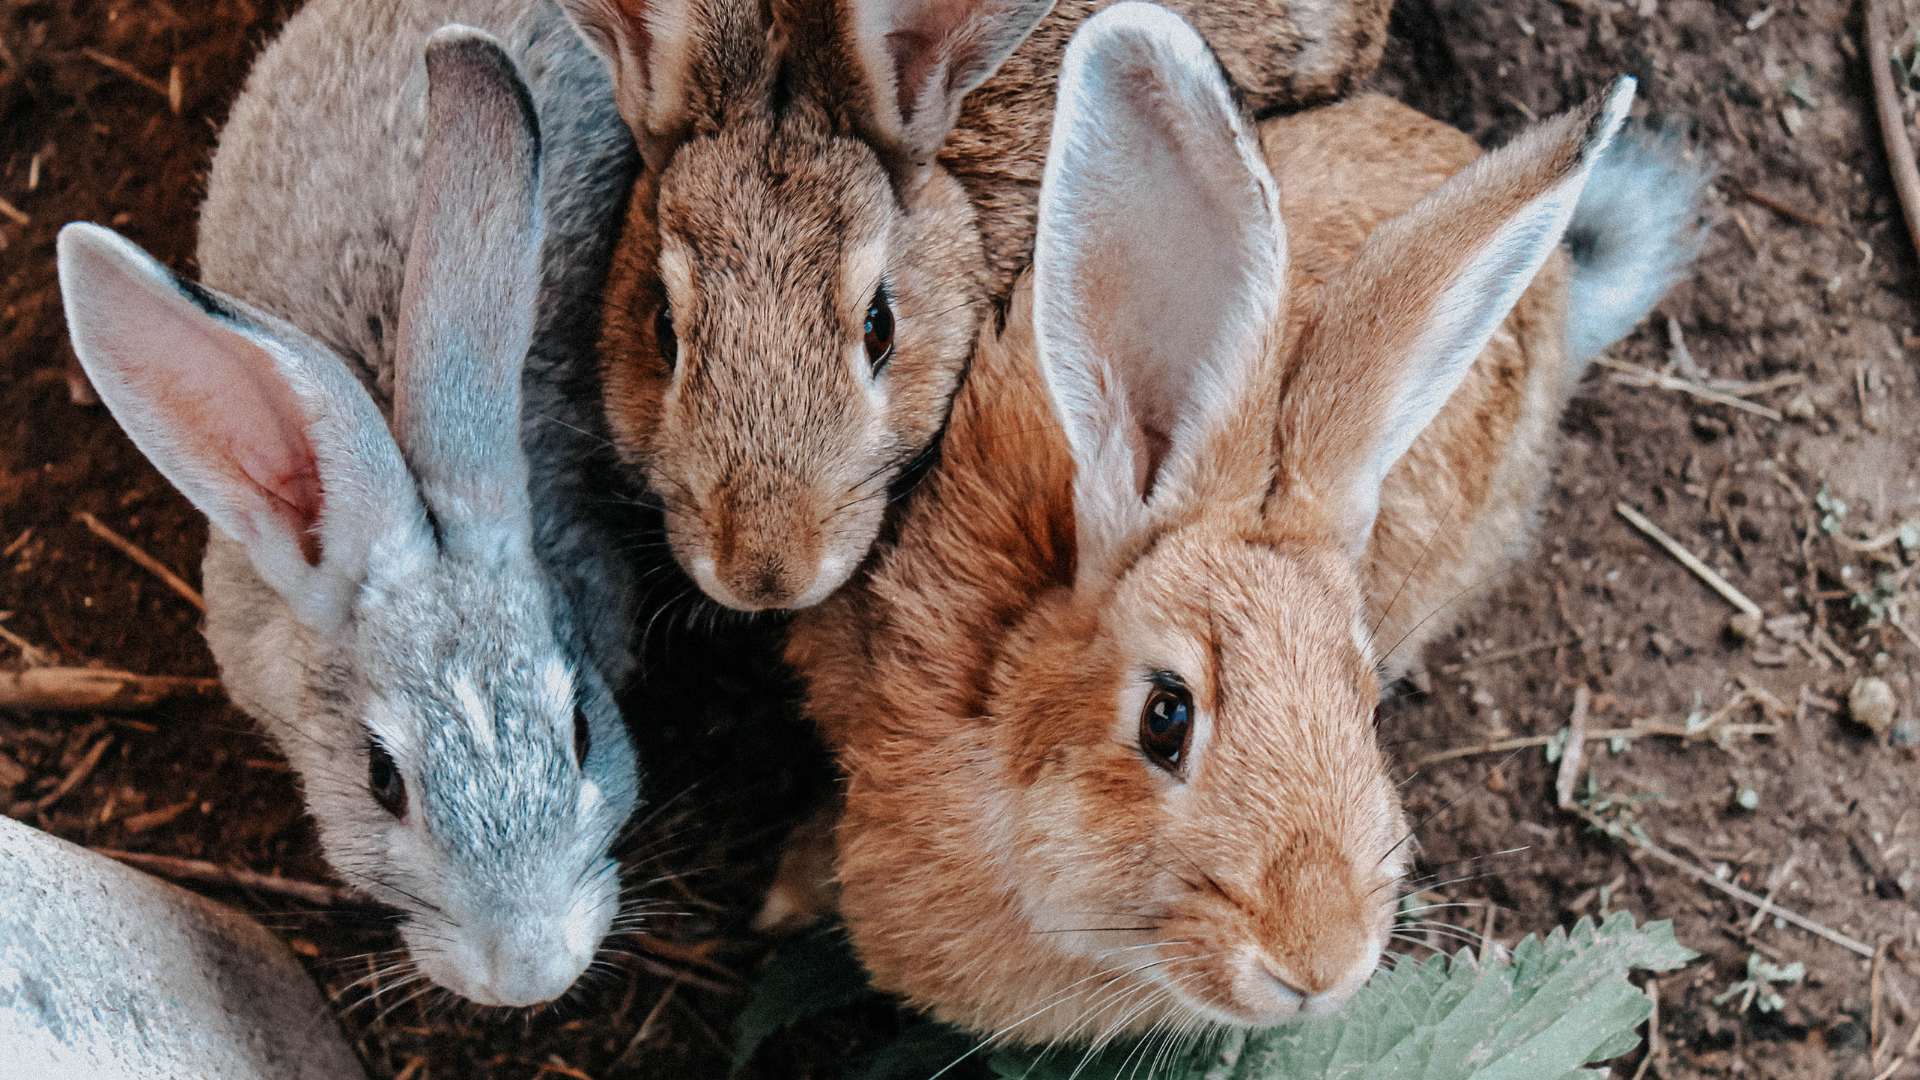 Rabbit Awareness Week: Protect And Prevent Through Neutering And Nutrition